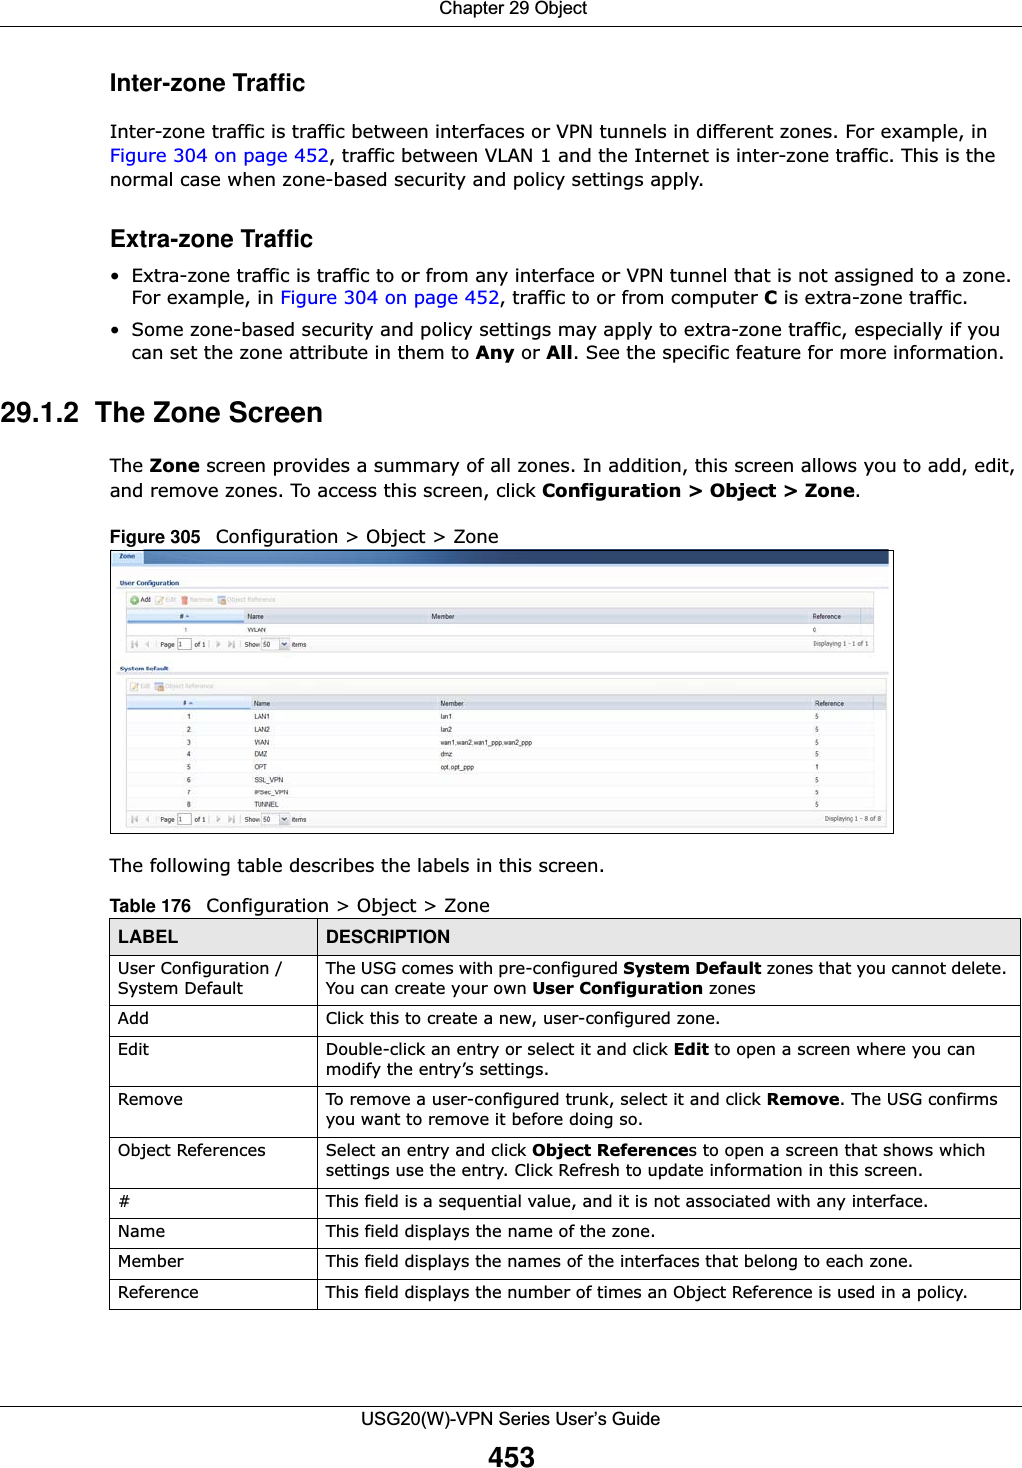  Chapter 29 ObjectUSG20(W)-VPN Series User’s Guide453Inter-zone TrafficInter-zone traffic is traffic between interfaces or VPN tunnels in different zones. For example, in Figure 304 on page 452, traffic between VLAN 1 and the Internet is inter-zone traffic. This is the normal case when zone-based security and policy settings apply.Extra-zone Traffic• Extra-zone traffic is traffic to or from any interface or VPN tunnel that is not assigned to a zone. For example, in Figure 304 on page 452, traffic to or from computer C is extra-zone traffic. • Some zone-based security and policy settings may apply to extra-zone traffic, especially if you can set the zone attribute in them to Any or All. See the specific feature for more information.29.1.2  The Zone ScreenThe Zone screen provides a summary of all zones. In addition, this screen allows you to add, edit, and remove zones. To access this screen, click Configuration &gt; Object &gt; Zone.Figure 305   Configuration &gt; Object &gt; Zone  The following table describes the labels in this screen.  Table 176   Configuration &gt; Object &gt; ZoneLABEL DESCRIPTIONUser Configuration / System DefaultThe USG comes with pre-configured System Default zones that you cannot delete. You can create your own User Configuration zones Add Click this to create a new, user-configured zone.Edit Double-click an entry or select it and click Edit to open a screen where you can modify the entry’s settings. Remove To remove a user-configured trunk, select it and click Remove. The USG confirms you want to remove it before doing so.Object References Select an entry and click Object References to open a screen that shows which settings use the entry. Click Refresh to update information in this screen.# This field is a sequential value, and it is not associated with any interface.Name This field displays the name of the zone.Member This field displays the names of the interfaces that belong to each zone.Reference This field displays the number of times an Object Reference is used in a policy.